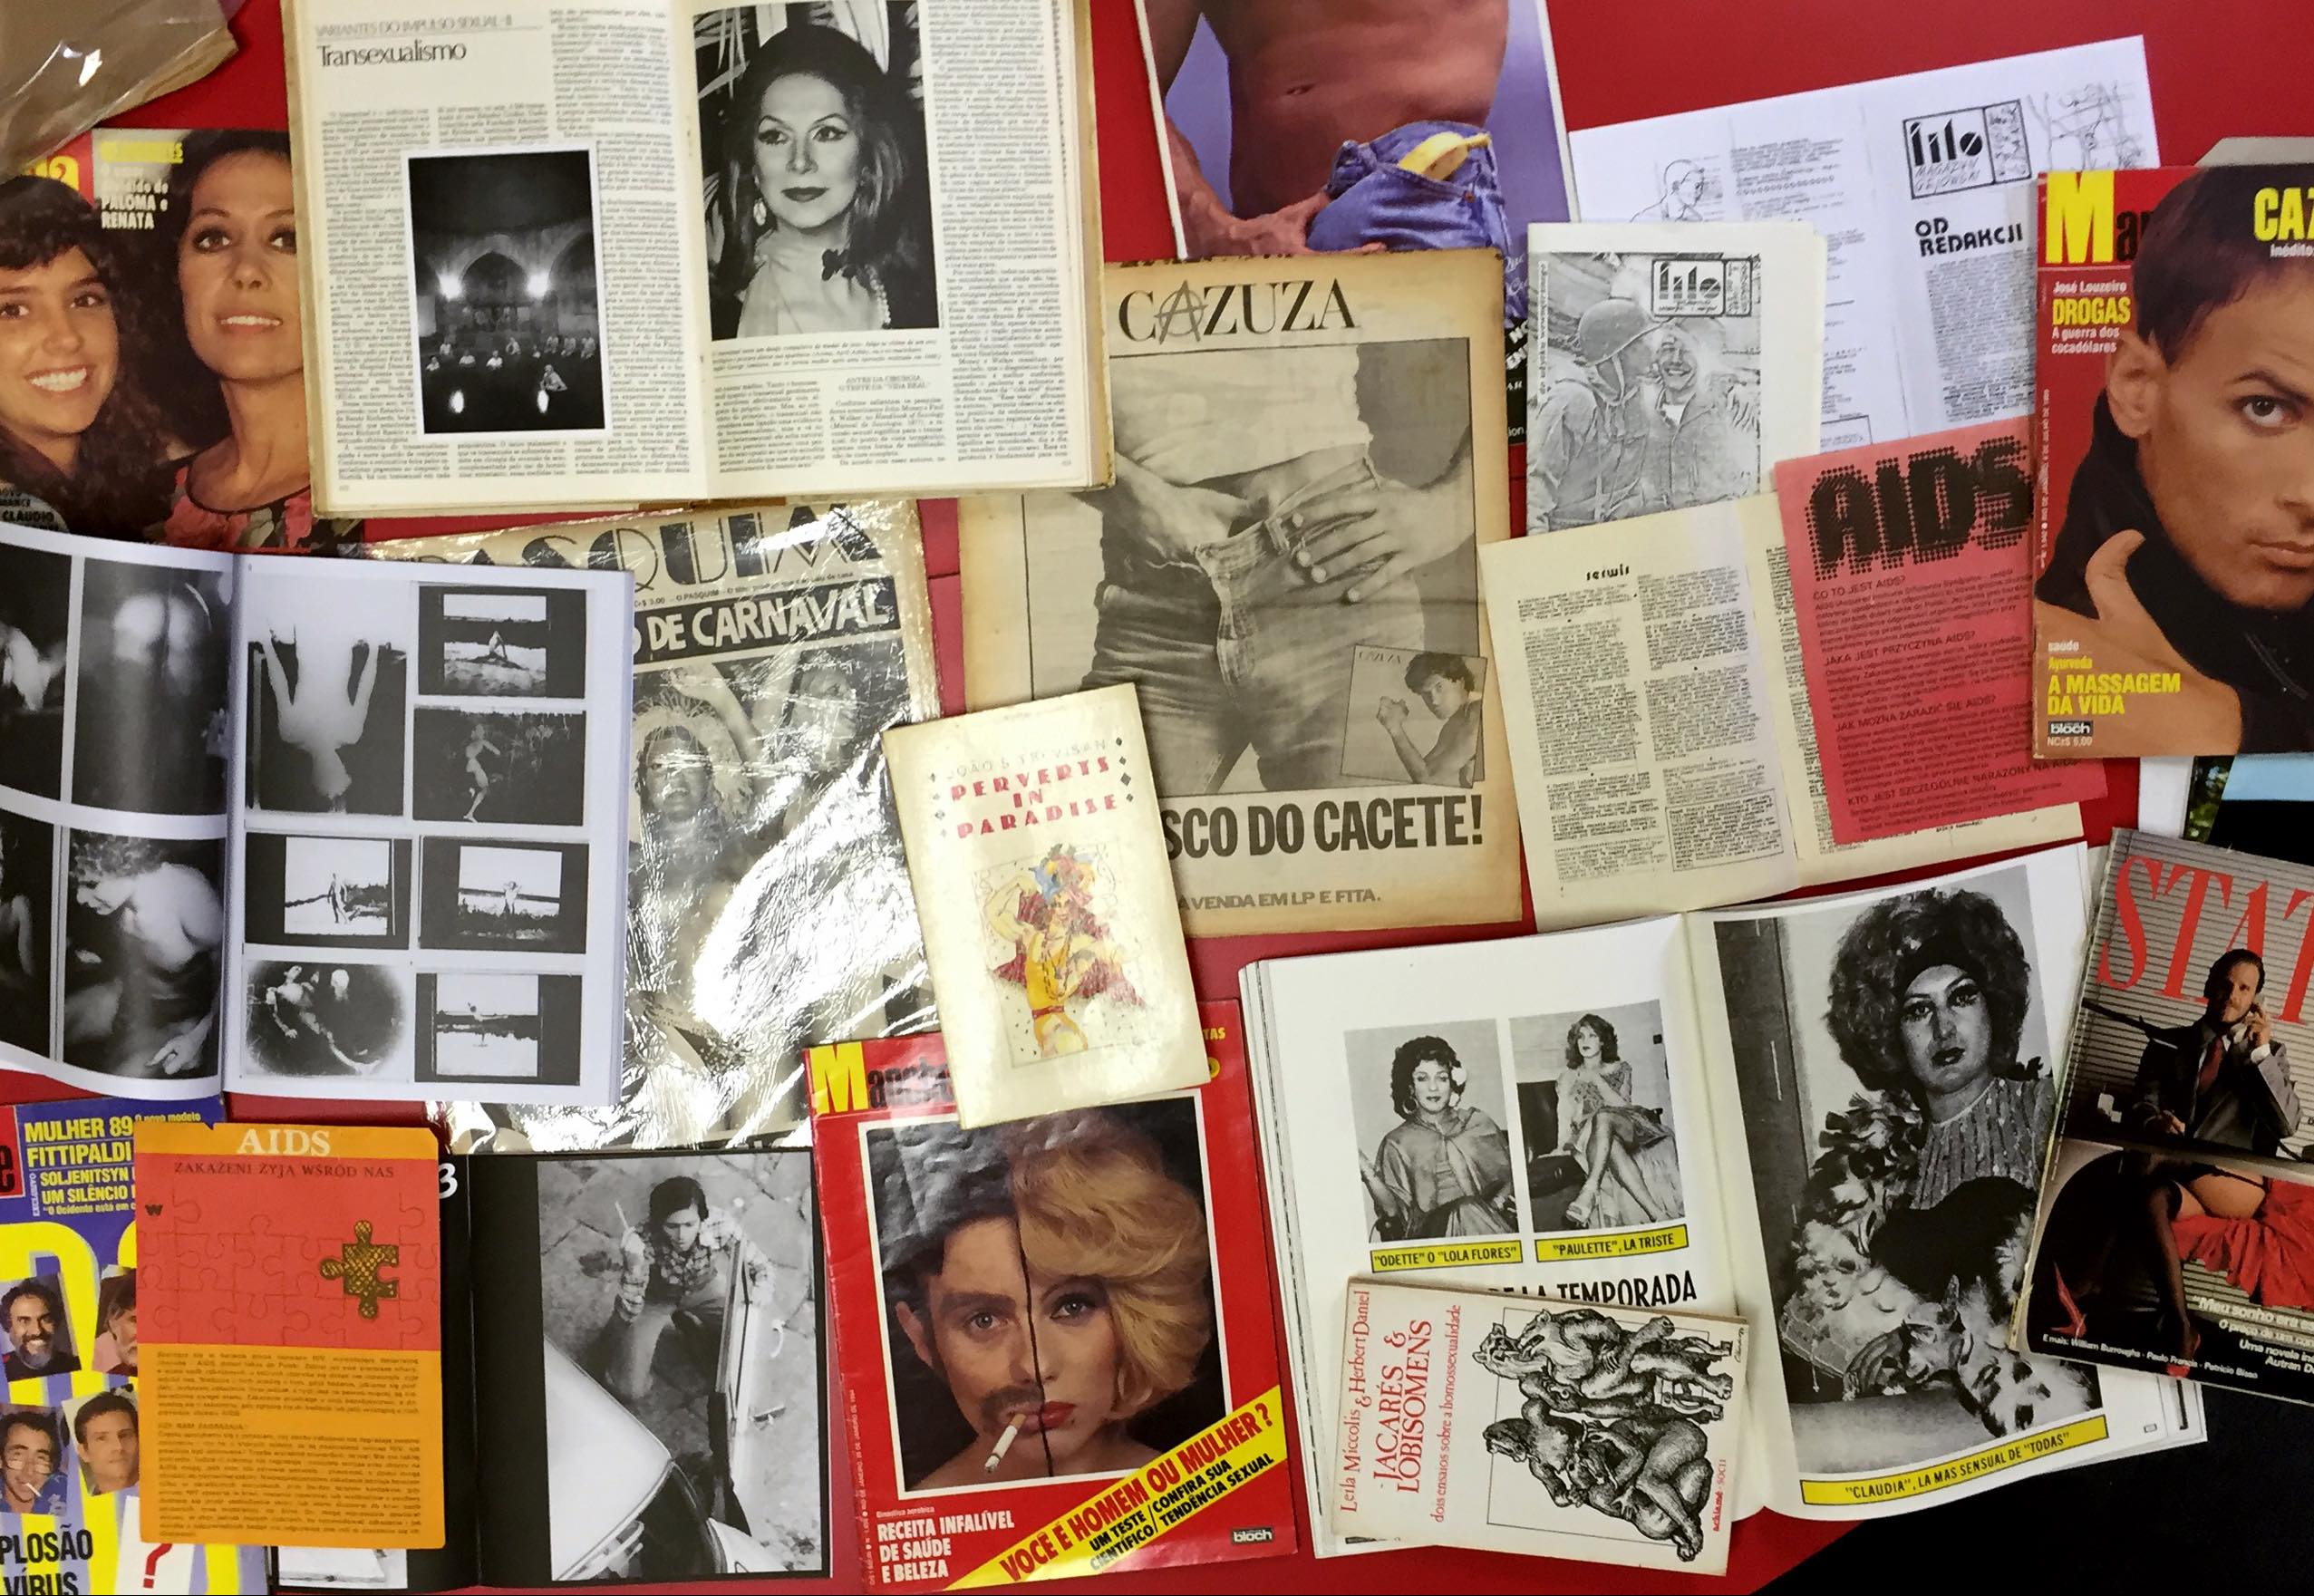  queer archives institute research materials